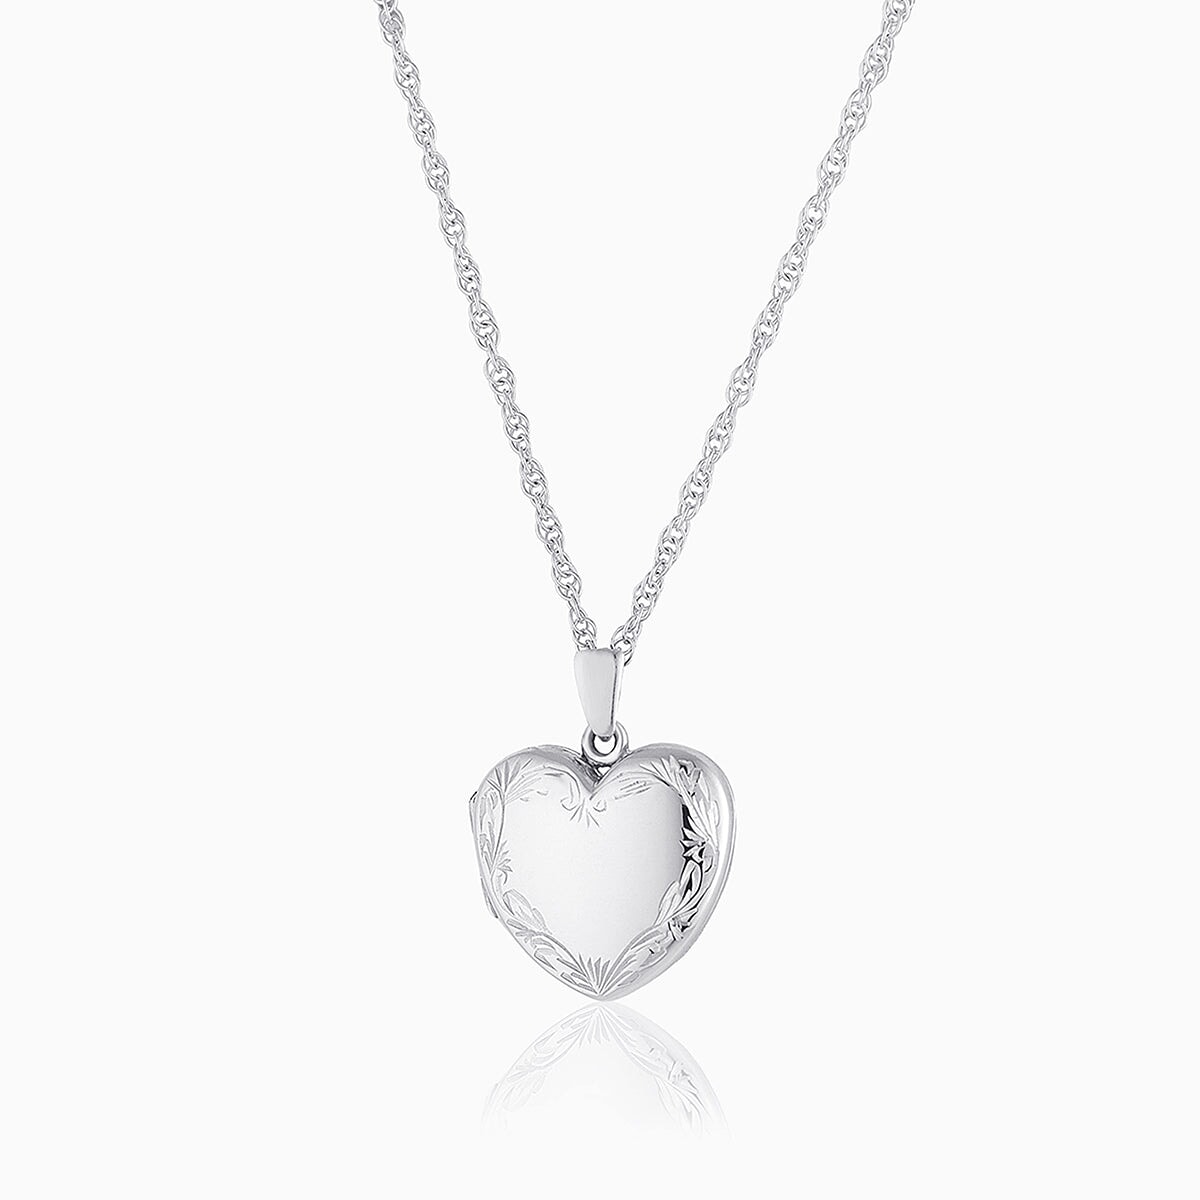 Product title: Premium Silver Engraved Heart Locket, product type: Locket